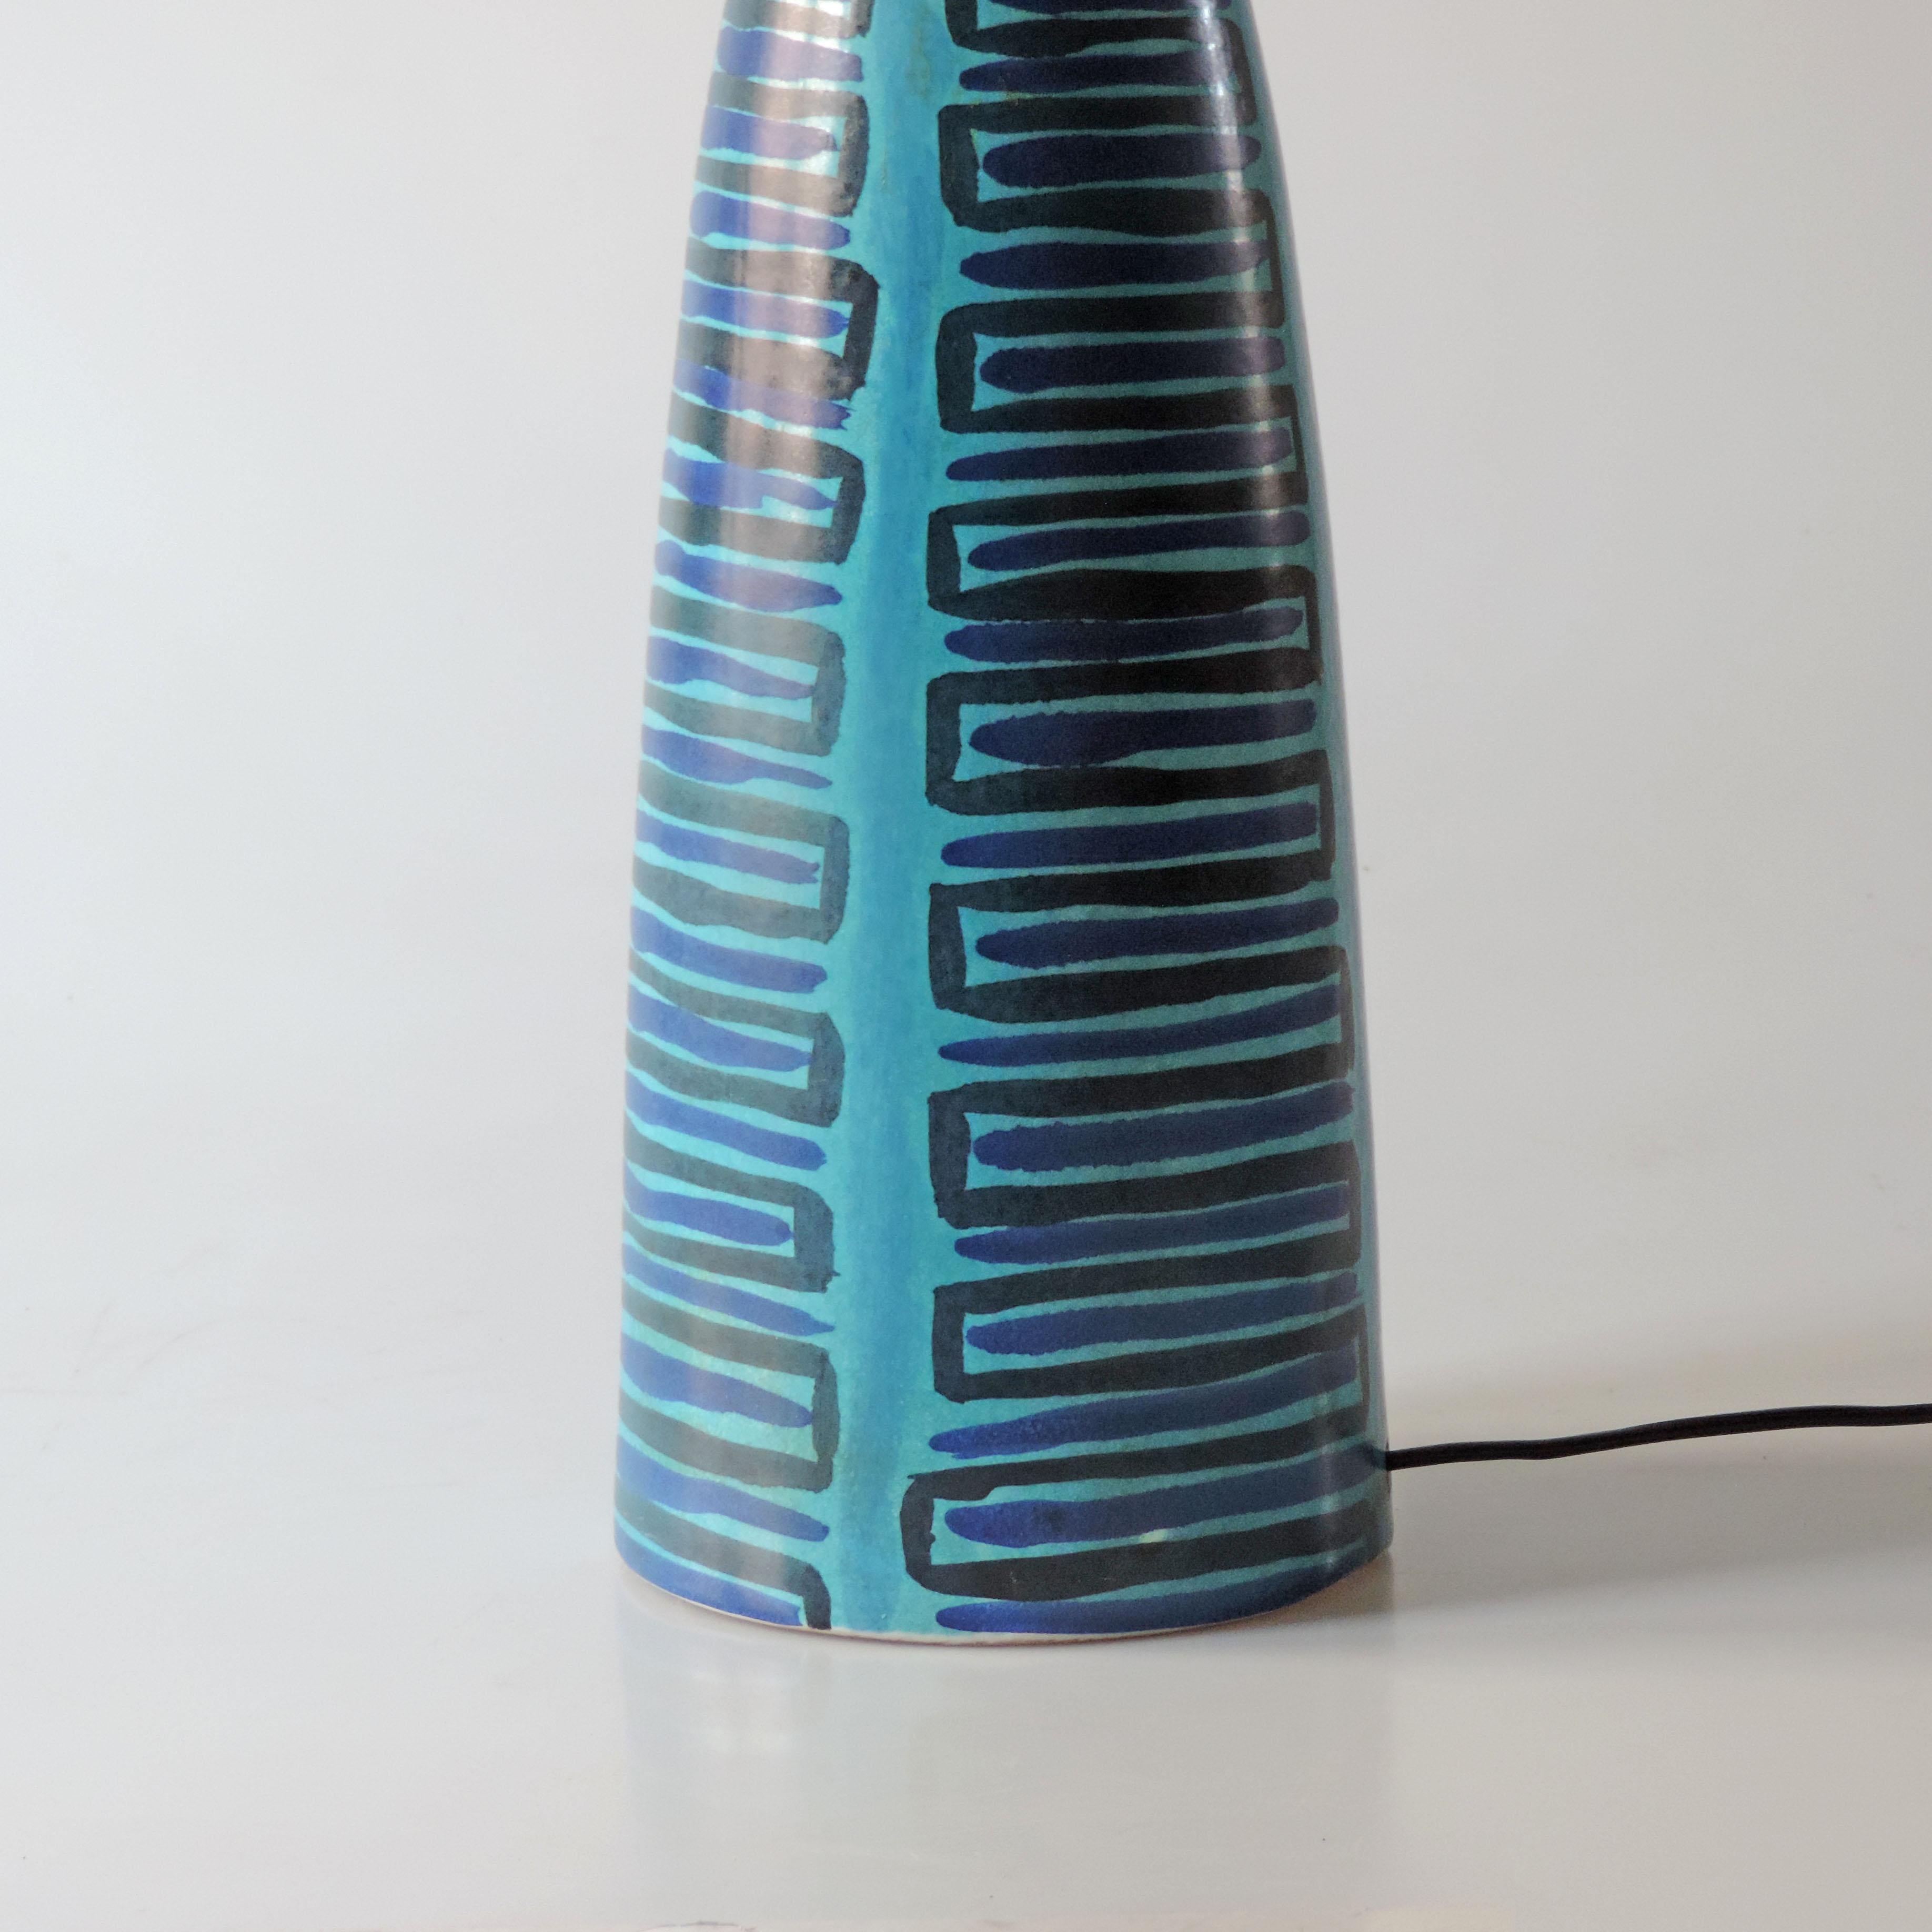 Monumental Italian 1950s ceramic table lamp by Baldelli. 
Measurement is without shade
Lamp sold without lampshade.